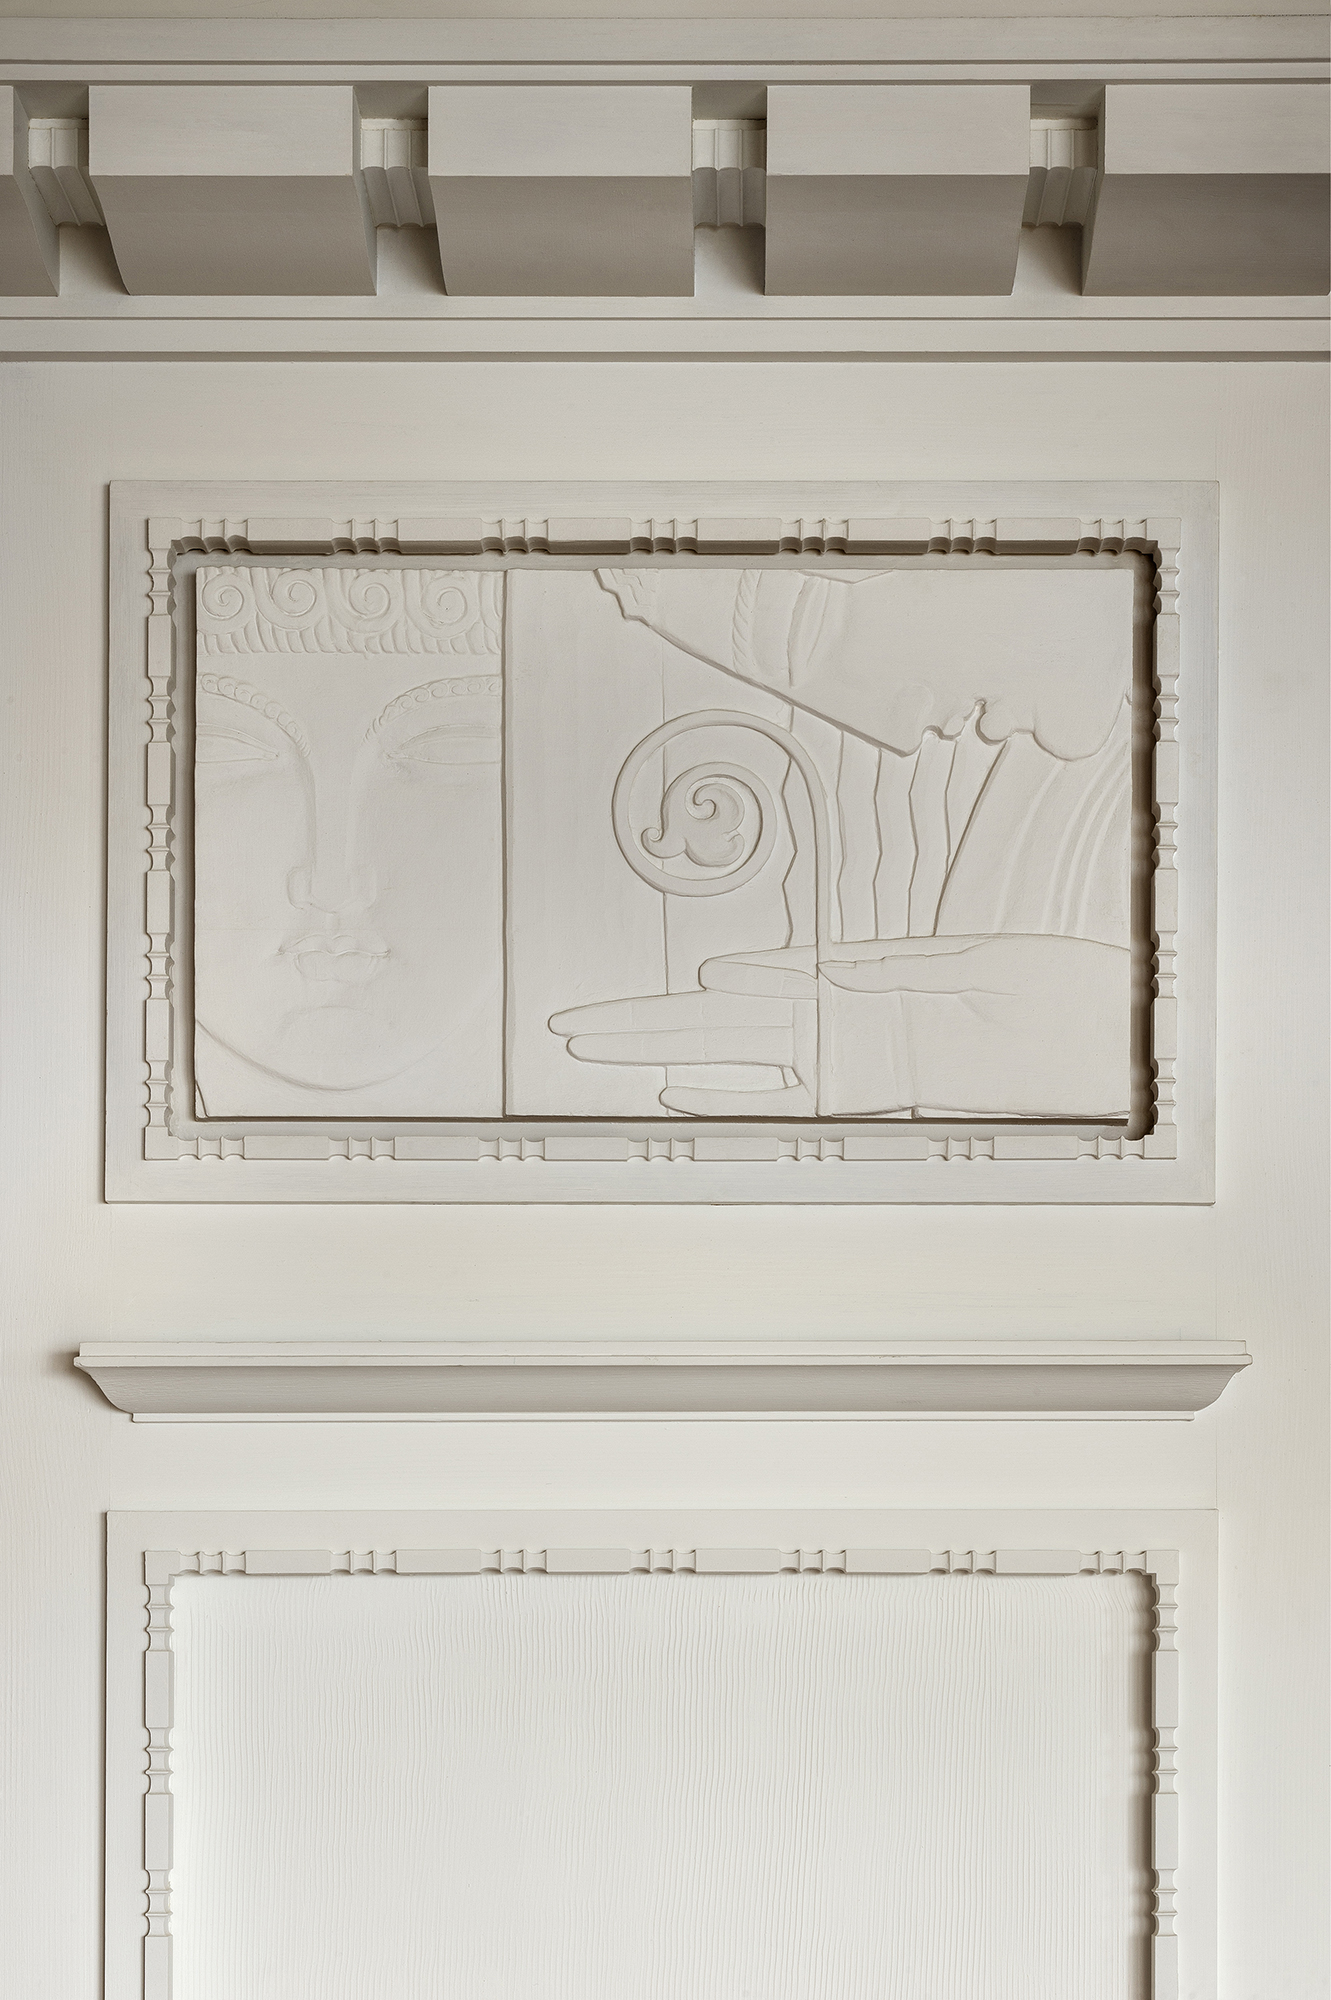 Bas-relief inspired by Ruhlmann, in Monaco: detail